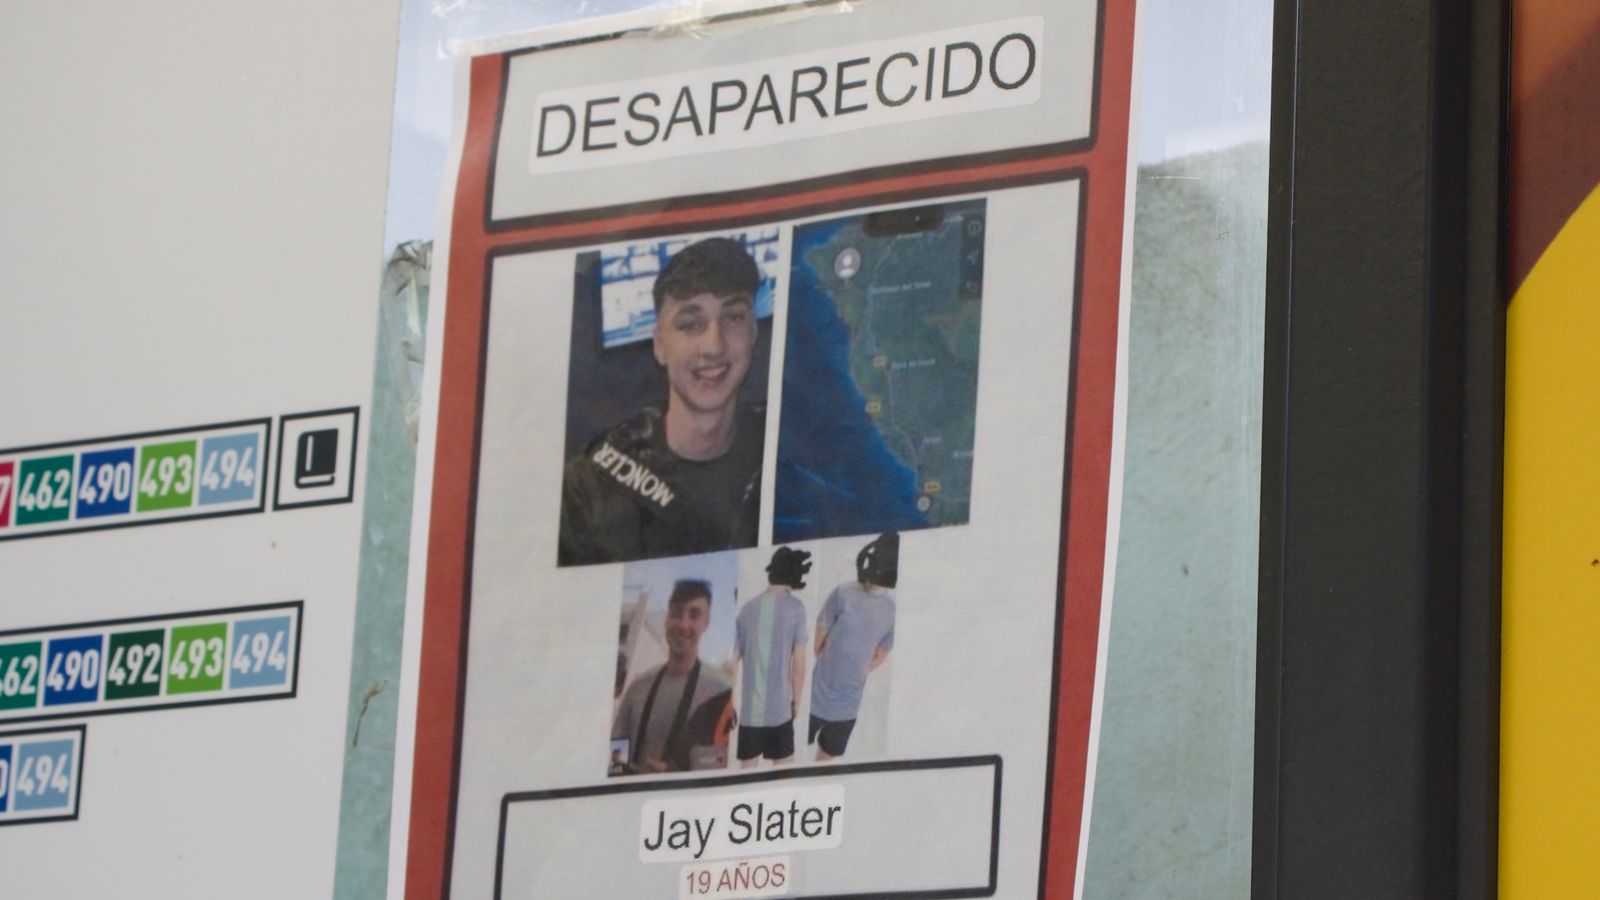 Jay Slater search: Teenager's disappearance in Tenerife shrouded in speculation and questions